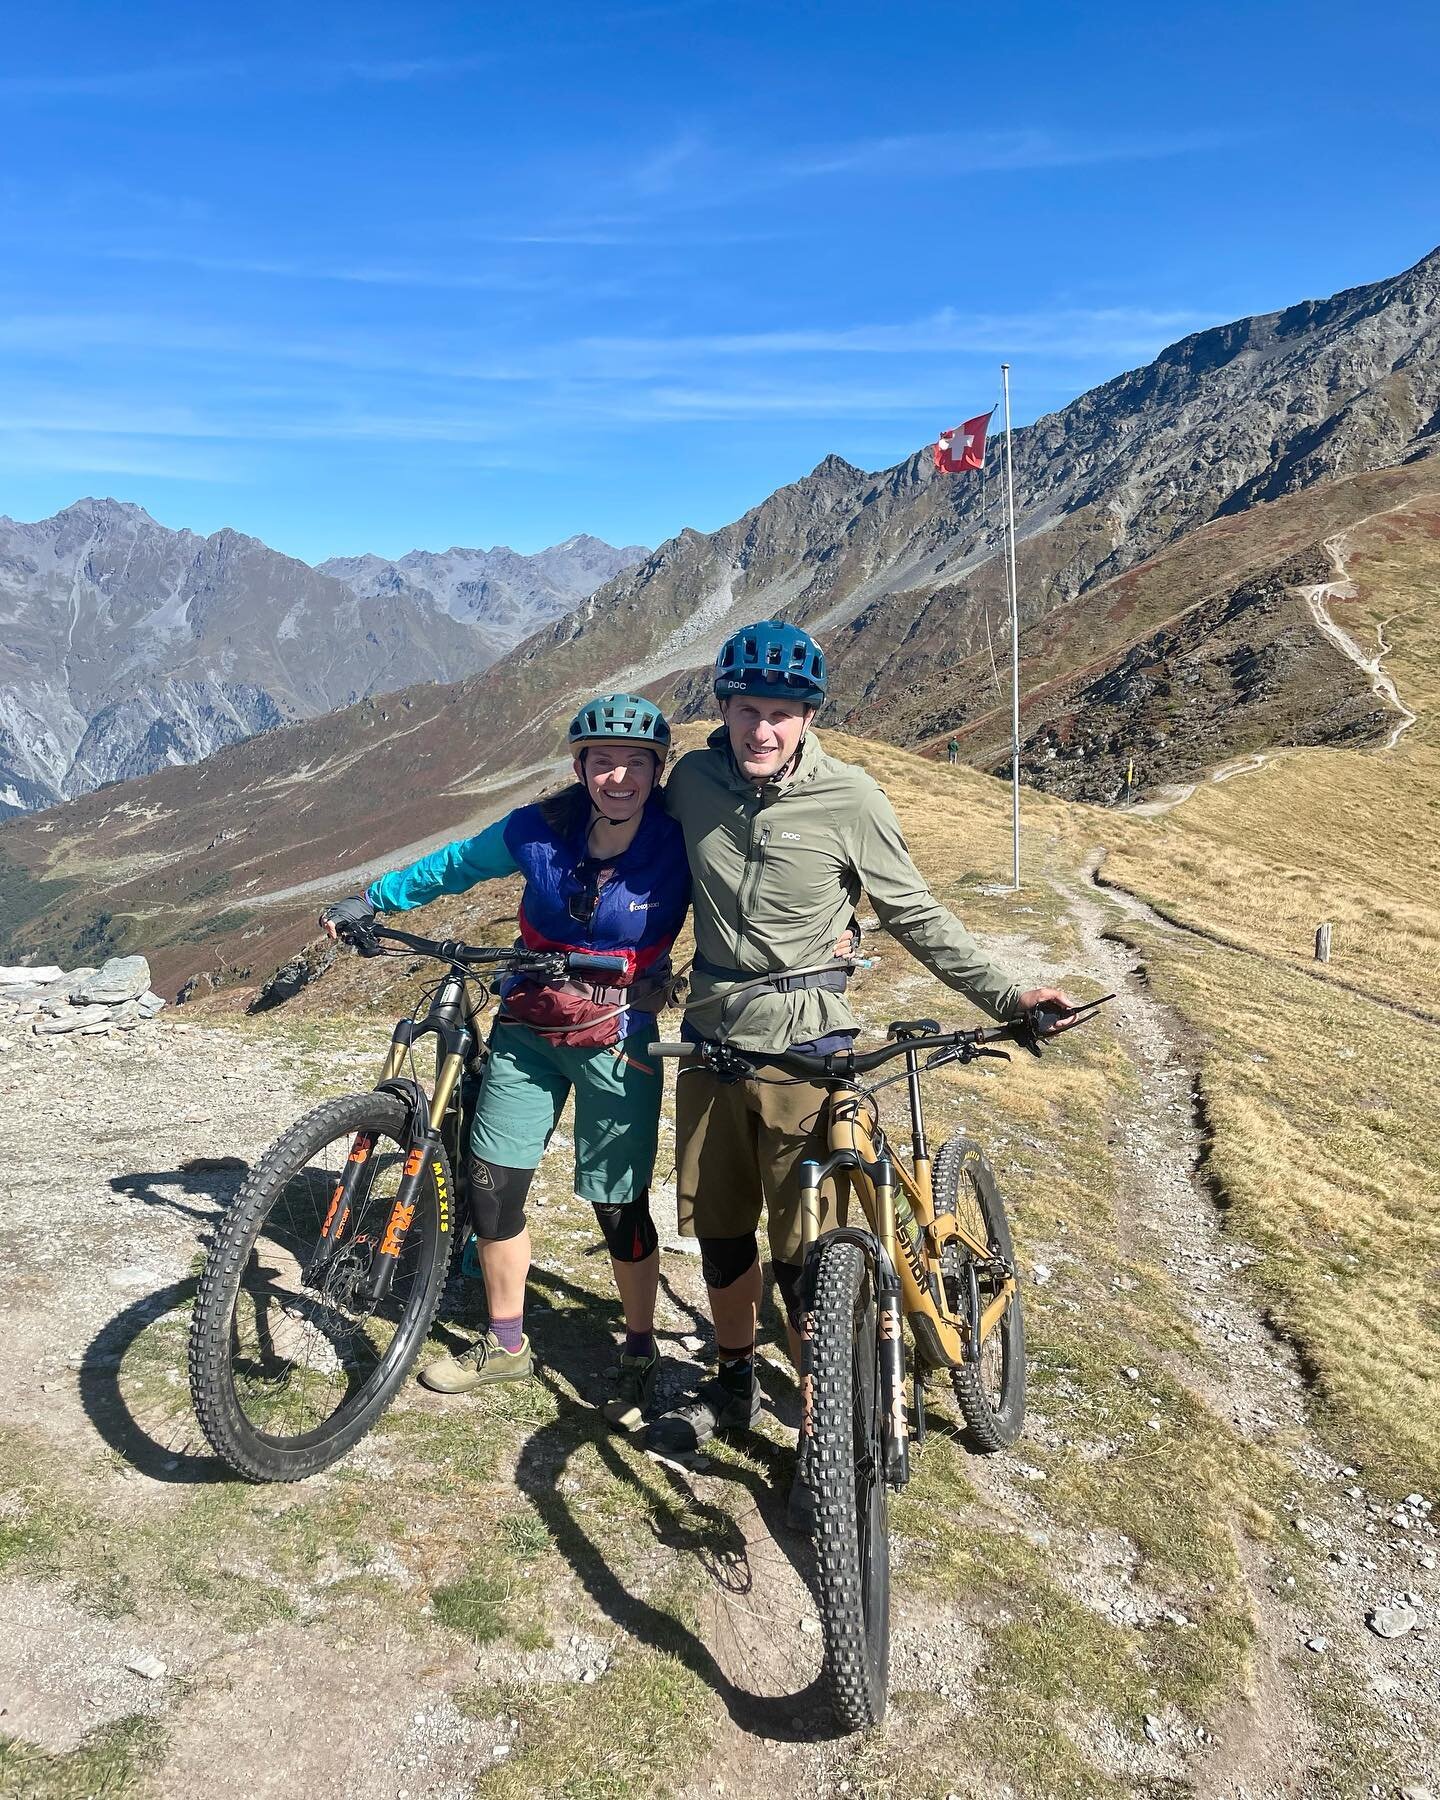 Great day riding Col de Mille with Milena and Wheeler yesterday thx to @trailtaxi.ch for the uplift. Autumnal colours are really starting show! 
@coticbikes 
.
.
.
#mtb #mtblove #enduromtb #mtbadventure #alltimefalltime #chamonixmtb